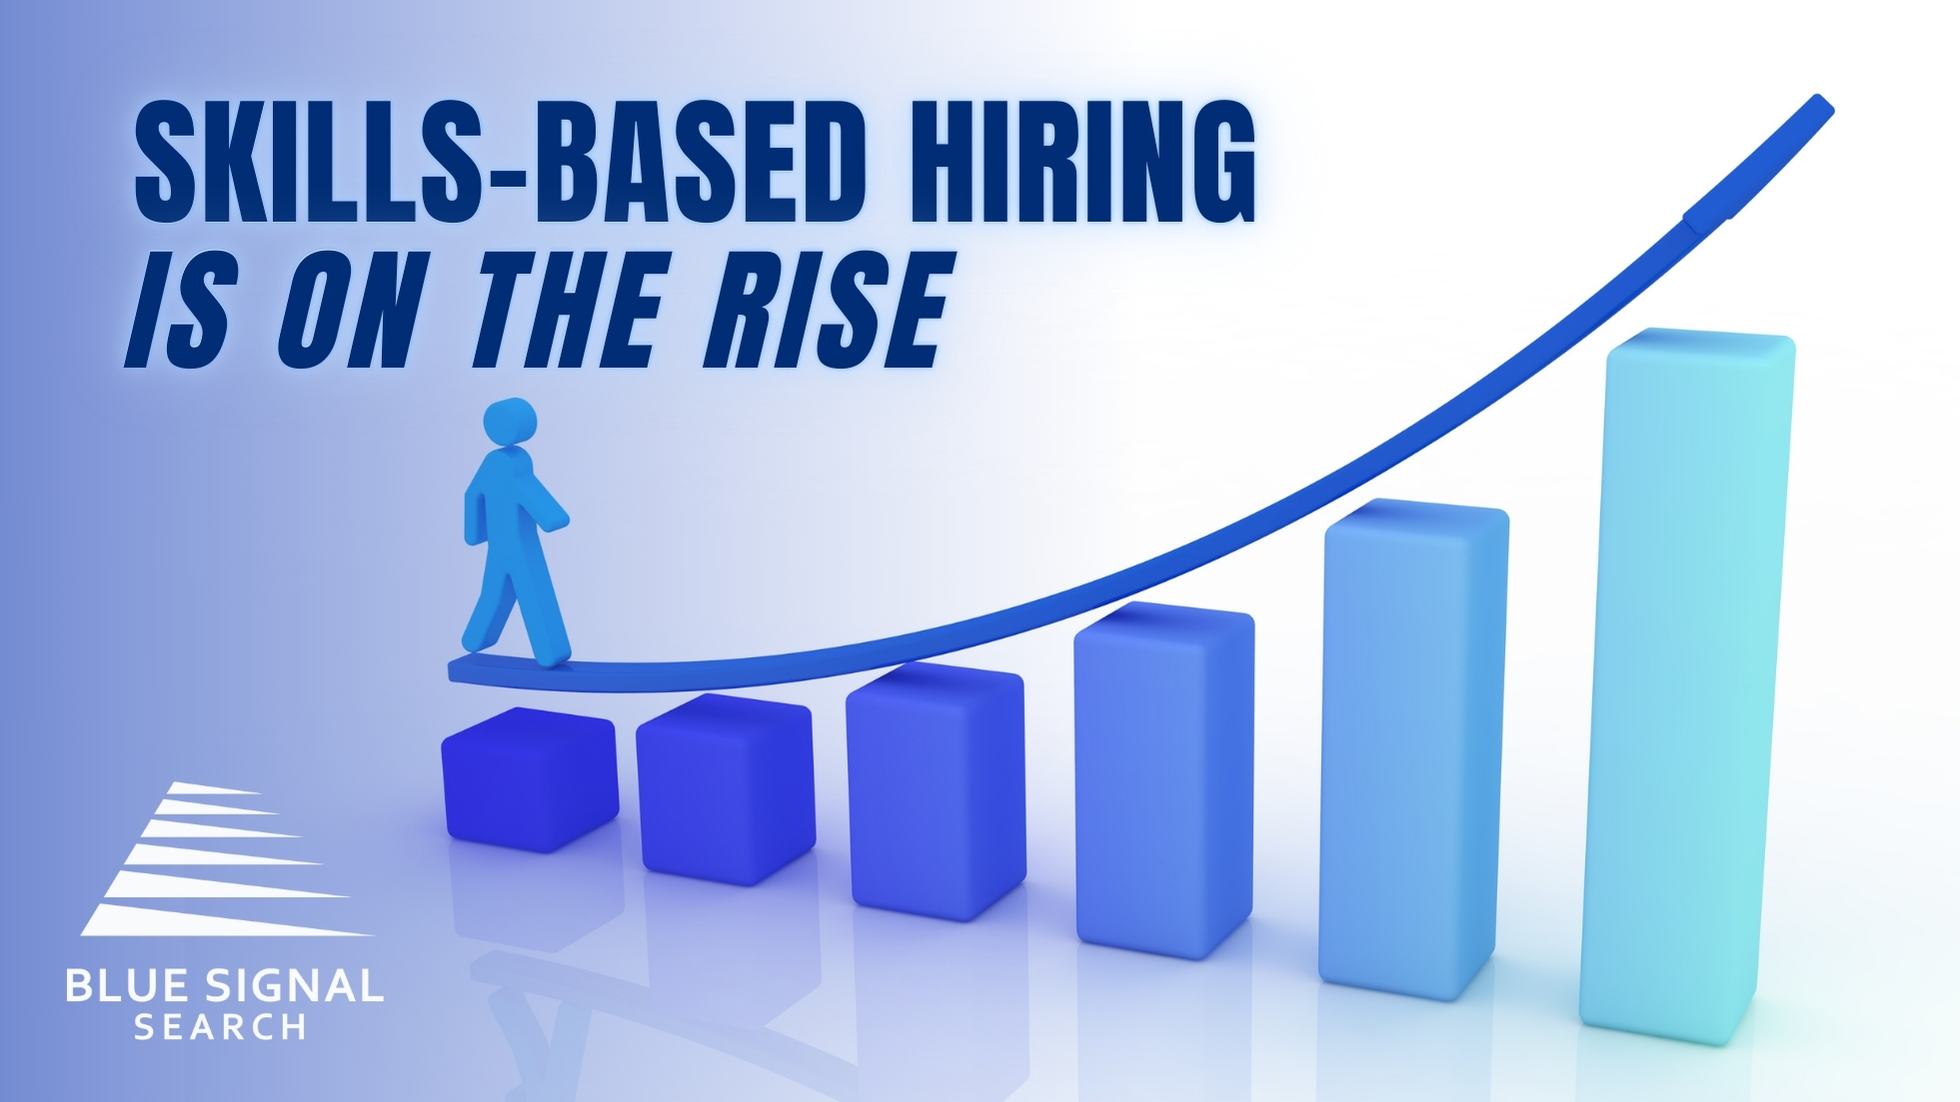 A graph highlighting skills-based hiring as a prominent recruiting trend, with an upward trajectory indicating its rising importance in 2024.